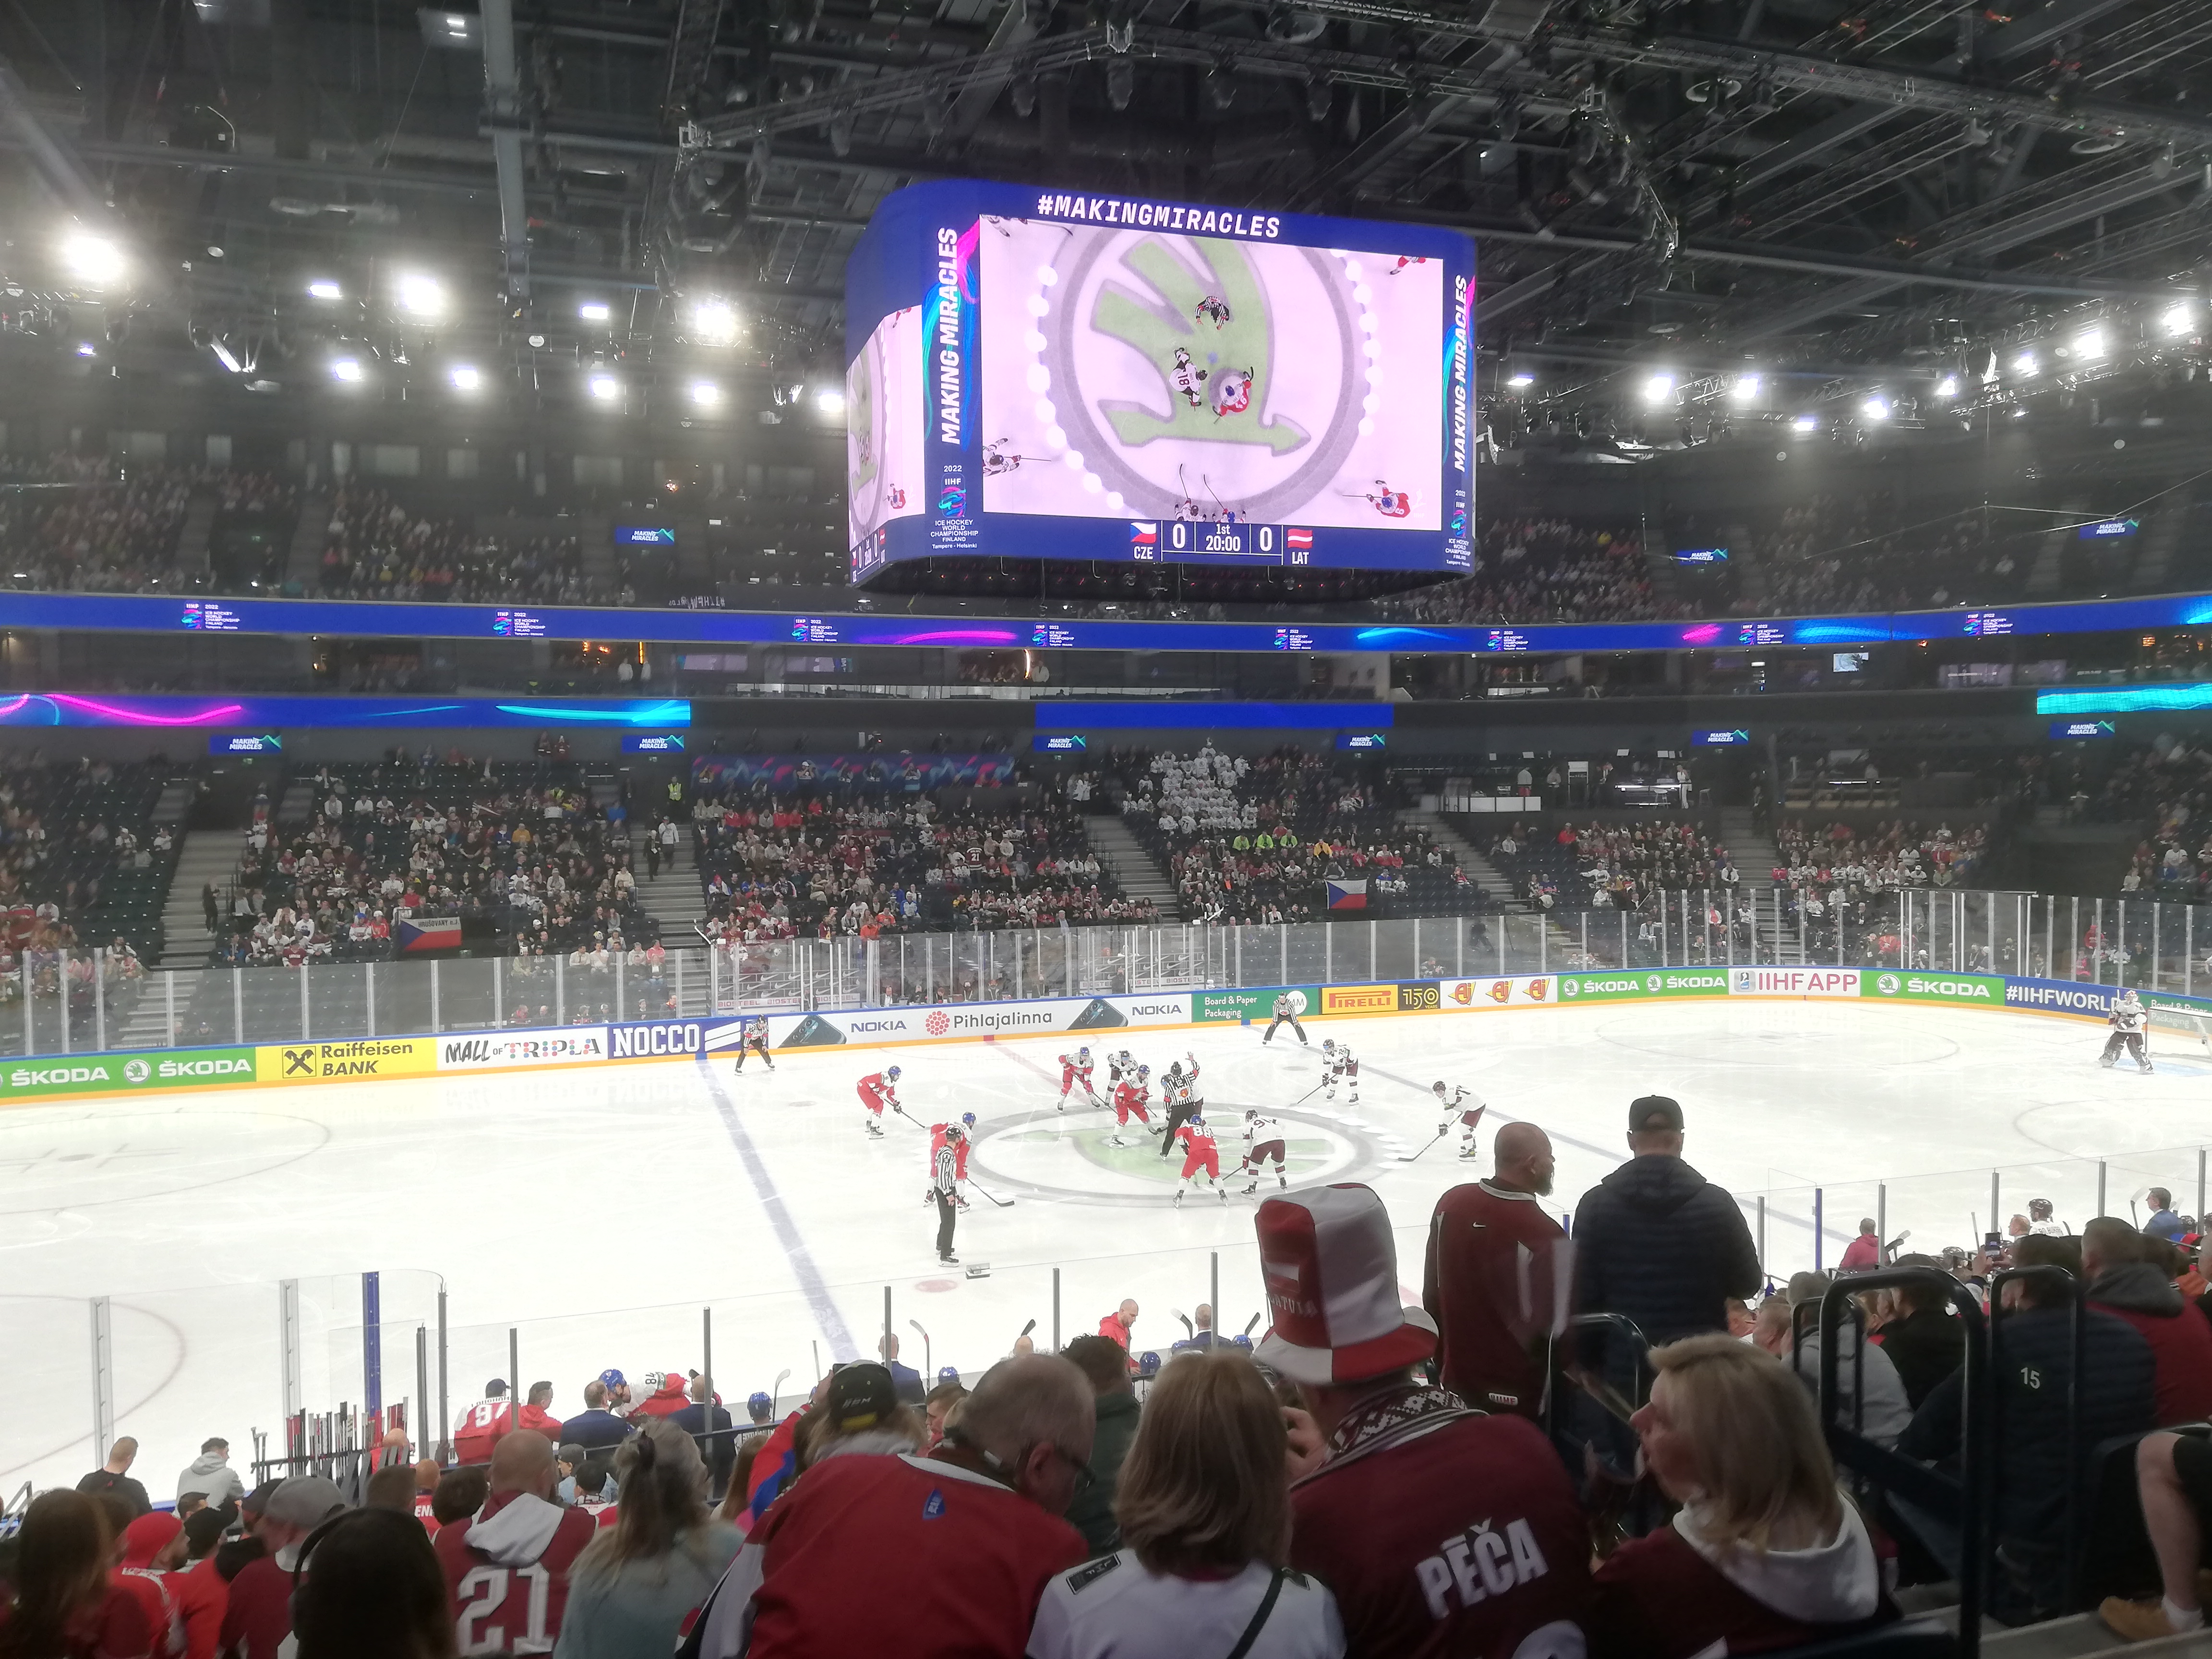 Fans and the ice surface during an game in the World Championship tournament in 2022